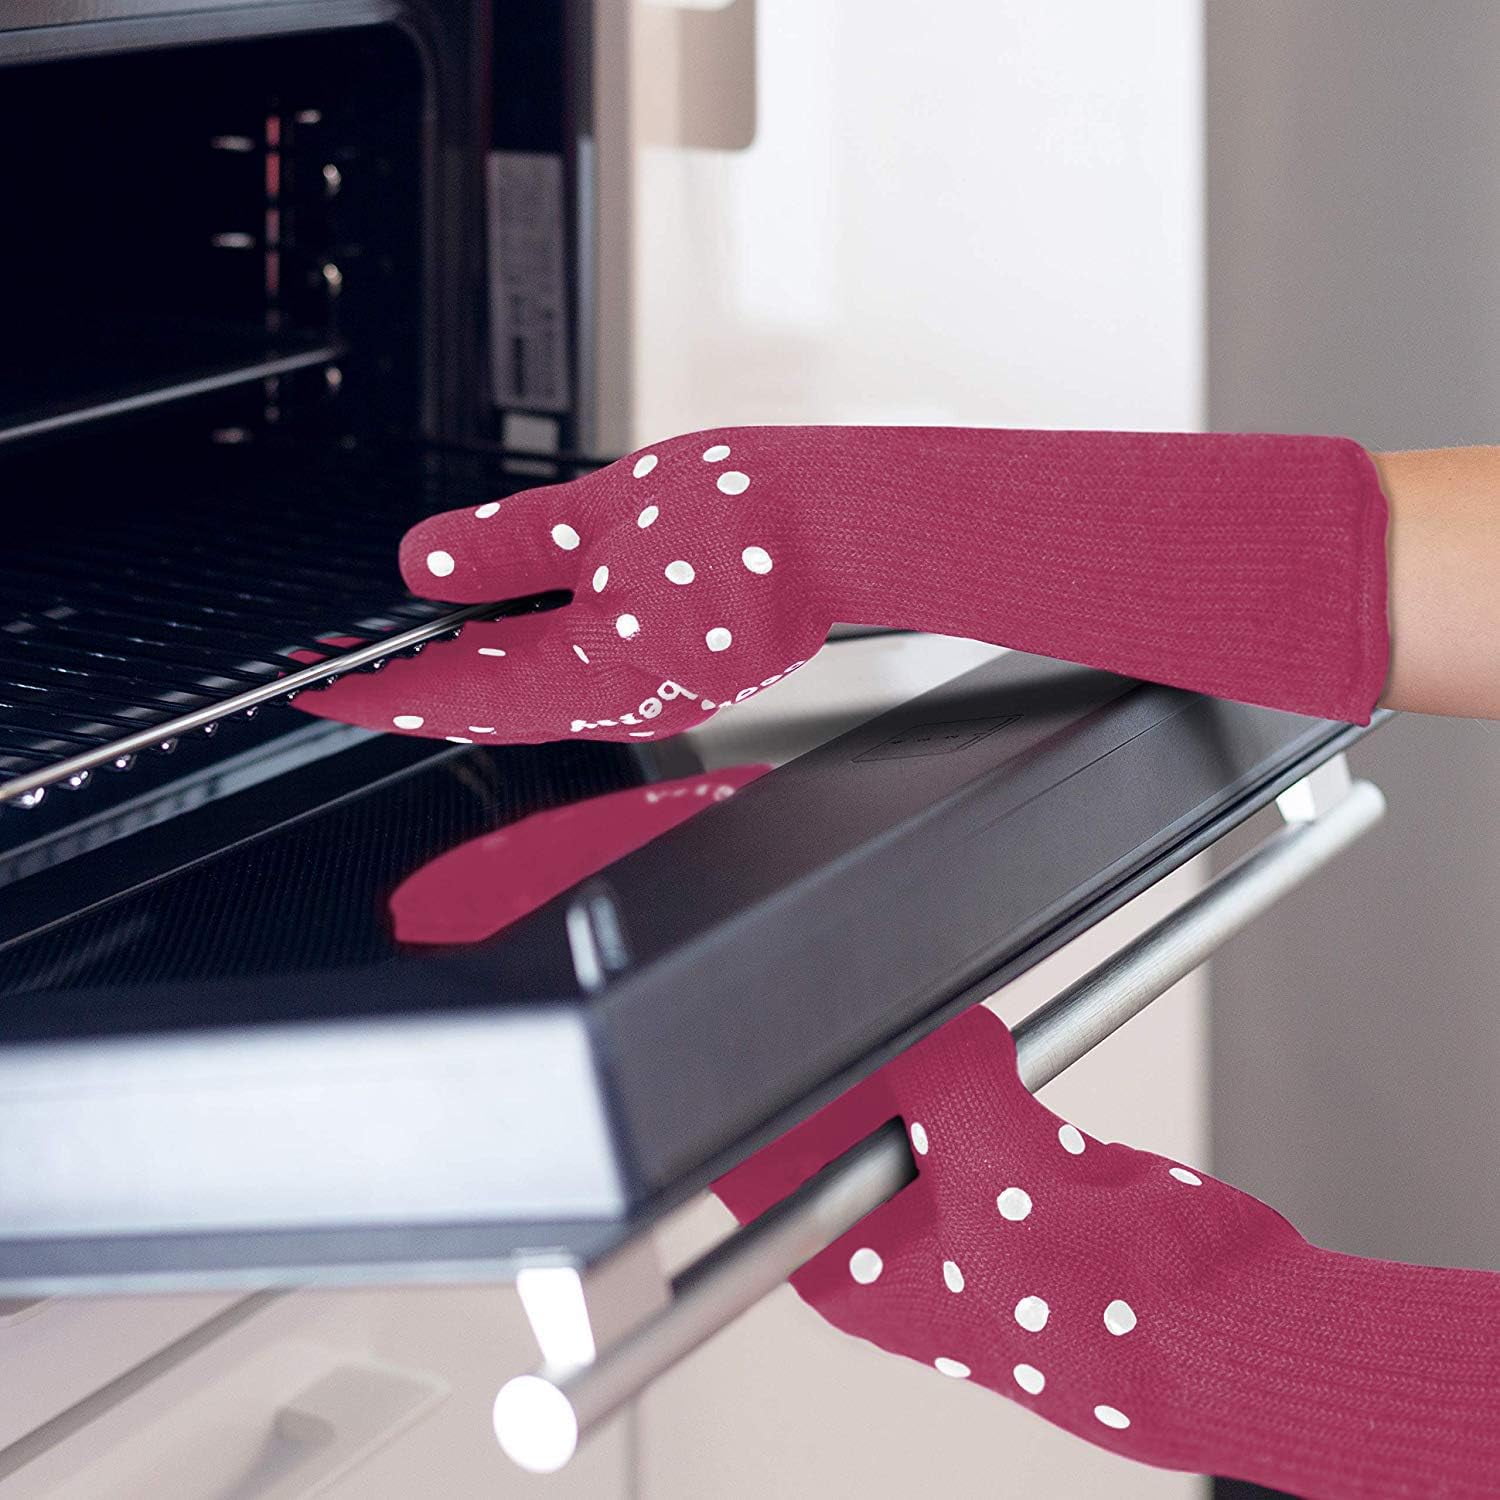 Oven Gloves with Fingers by Beets & Berry, Cooking Gloves Heat